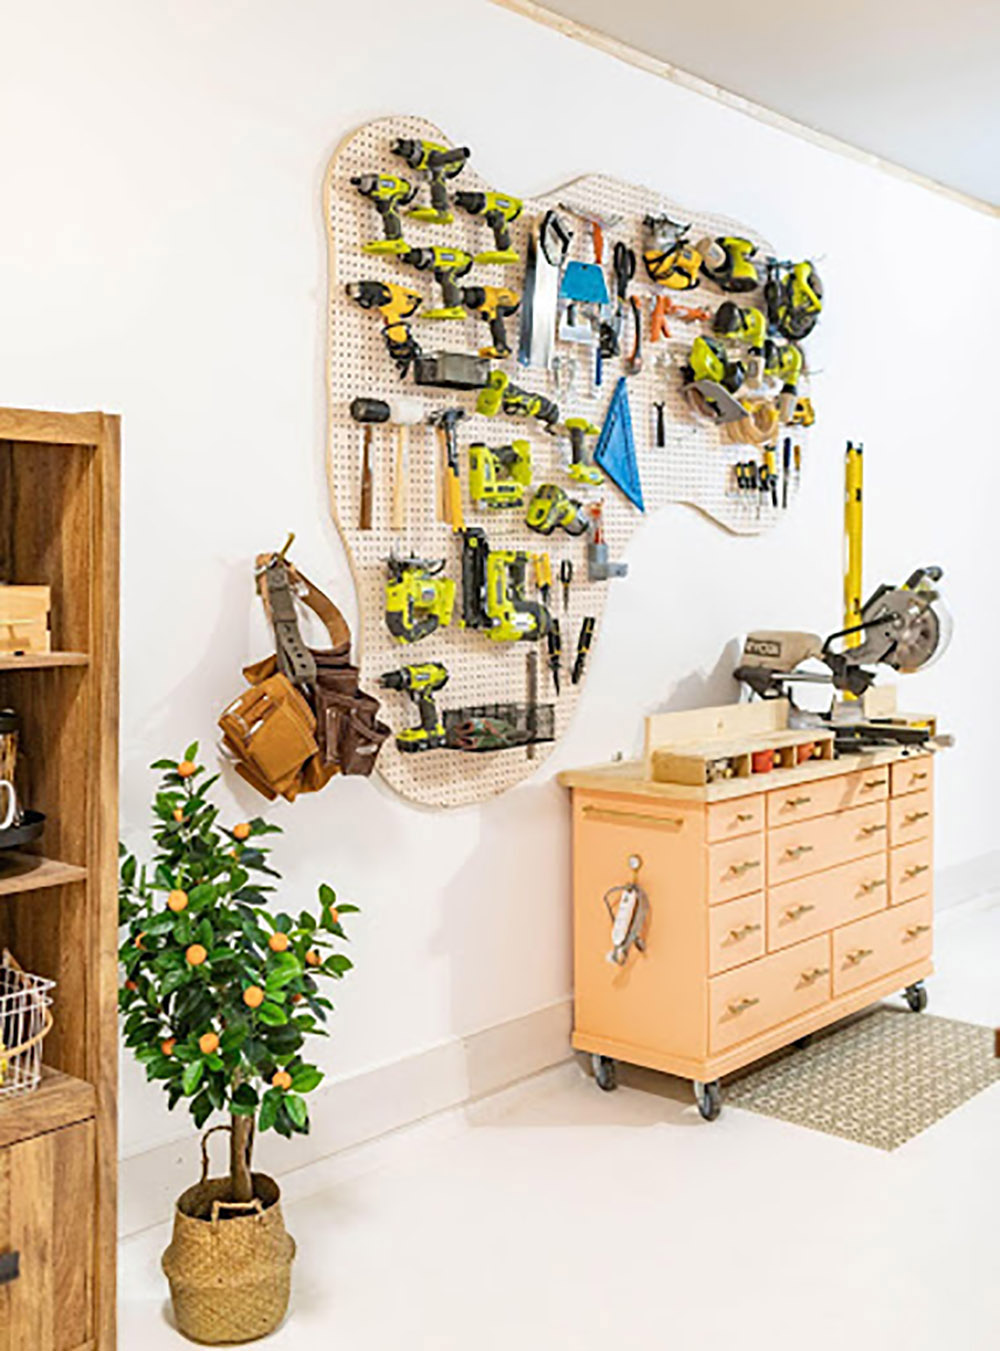 A wall of tools hanging on a pegboard hangs over a workbench with a saw.